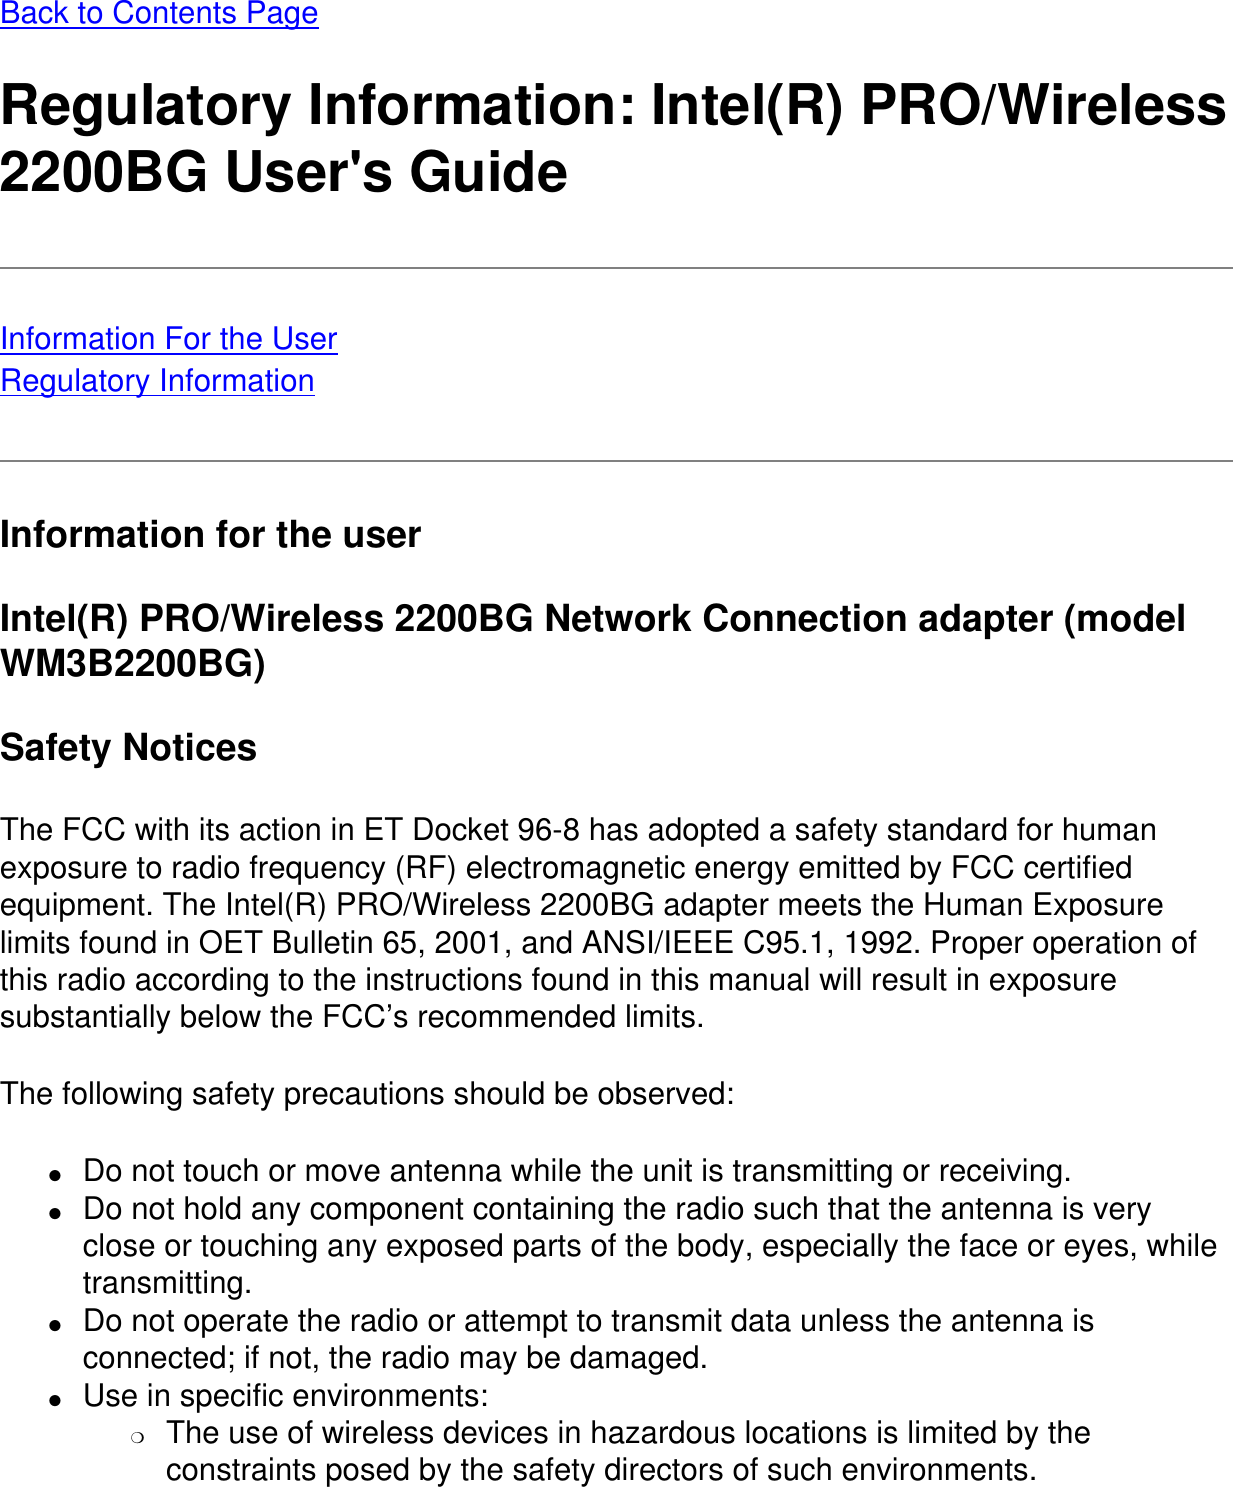 Back to Contents PageRegulatory Information: Intel(R) PRO/Wireless 2200BG User&apos;s GuideInformation For the UserRegulatory InformationInformation for the userIntel(R) PRO/Wireless 2200BG Network Connection adapter (model WM3B2200BG)Safety NoticesThe FCC with its action in ET Docket 96-8 has adopted a safety standard for human exposure to radio frequency (RF) electromagnetic energy emitted by FCC certified equipment. The Intel(R) PRO/Wireless 2200BG adapter meets the Human Exposure limits found in OET Bulletin 65, 2001, and ANSI/IEEE C95.1, 1992. Proper operation of this radio according to the instructions found in this manual will result in exposure substantially below the FCC’s recommended limits.The following safety precautions should be observed:●     Do not touch or move antenna while the unit is transmitting or receiving.●     Do not hold any component containing the radio such that the antenna is very close or touching any exposed parts of the body, especially the face or eyes, while transmitting.●     Do not operate the radio or attempt to transmit data unless the antenna is connected; if not, the radio may be damaged.●     Use in specific environments: ❍     The use of wireless devices in hazardous locations is limited by the constraints posed by the safety directors of such environments.